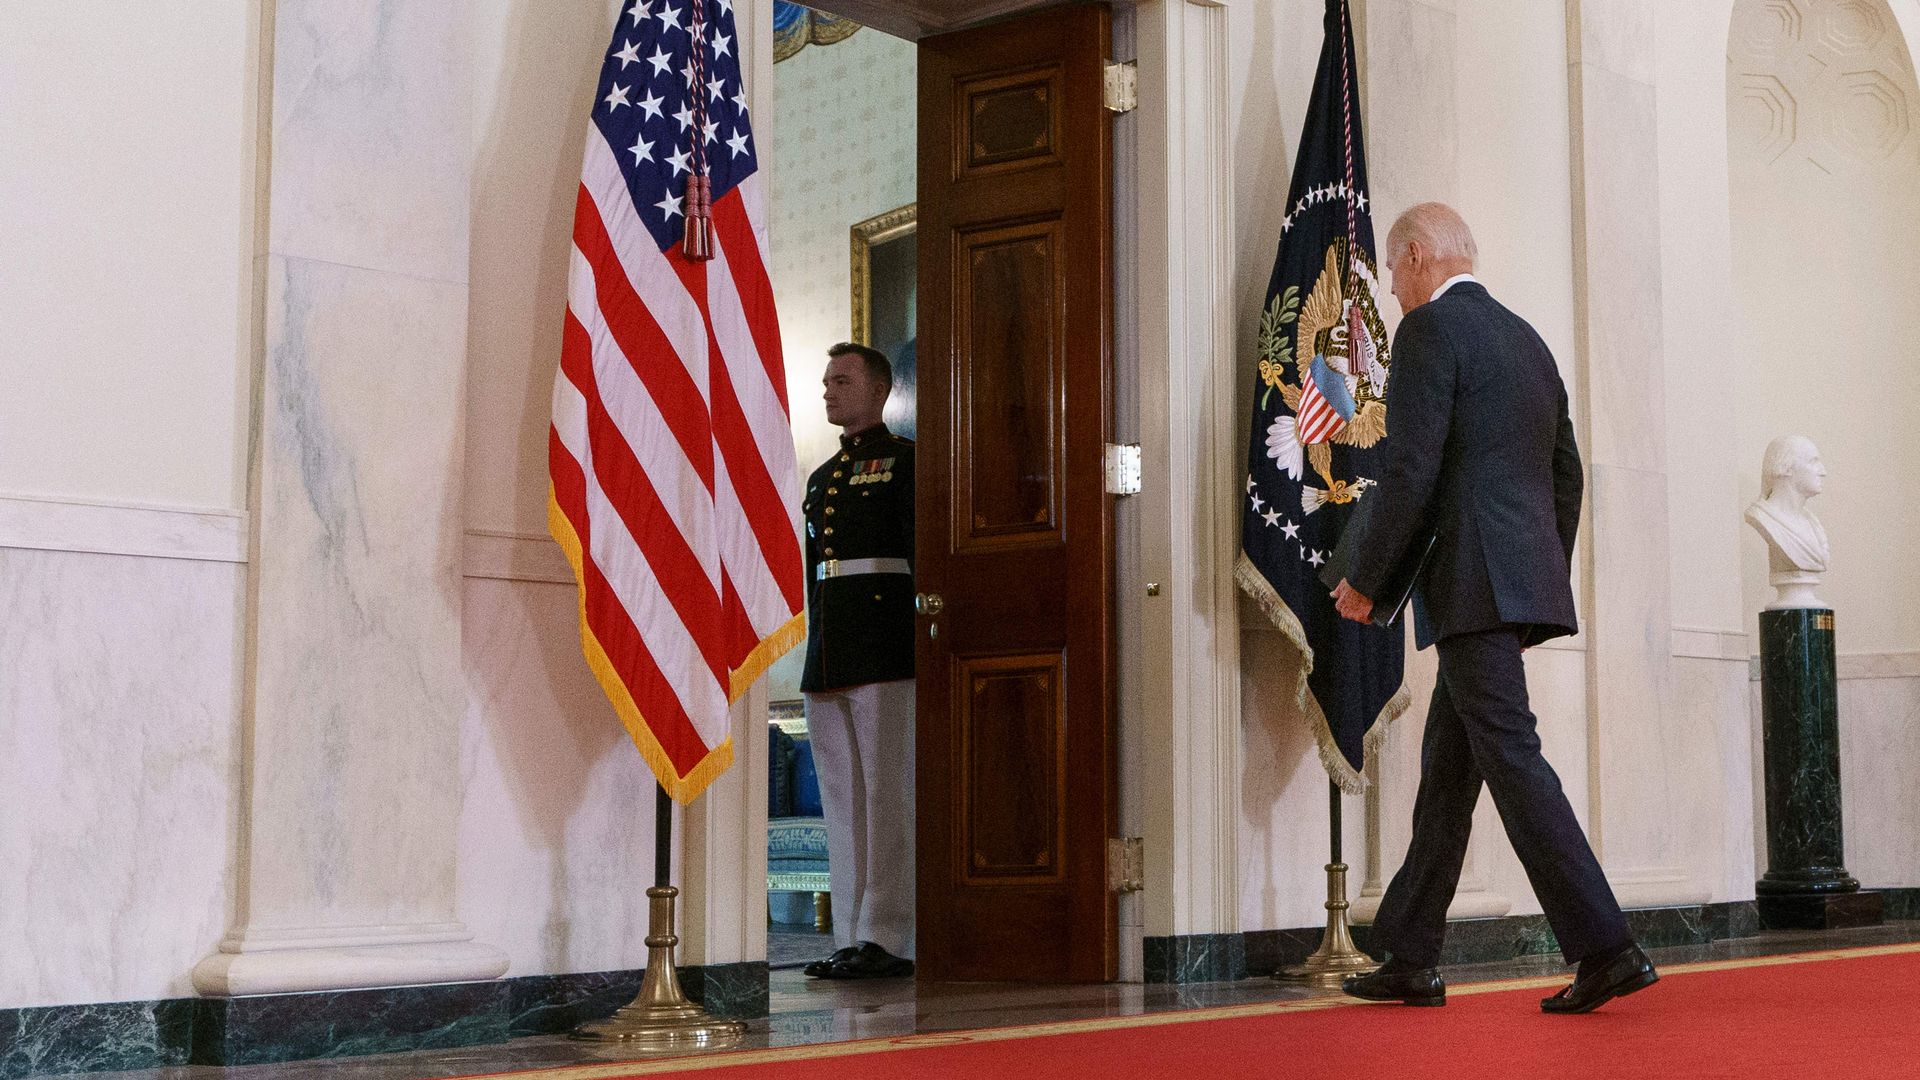 Biden leaves a speech about the Supreme Court